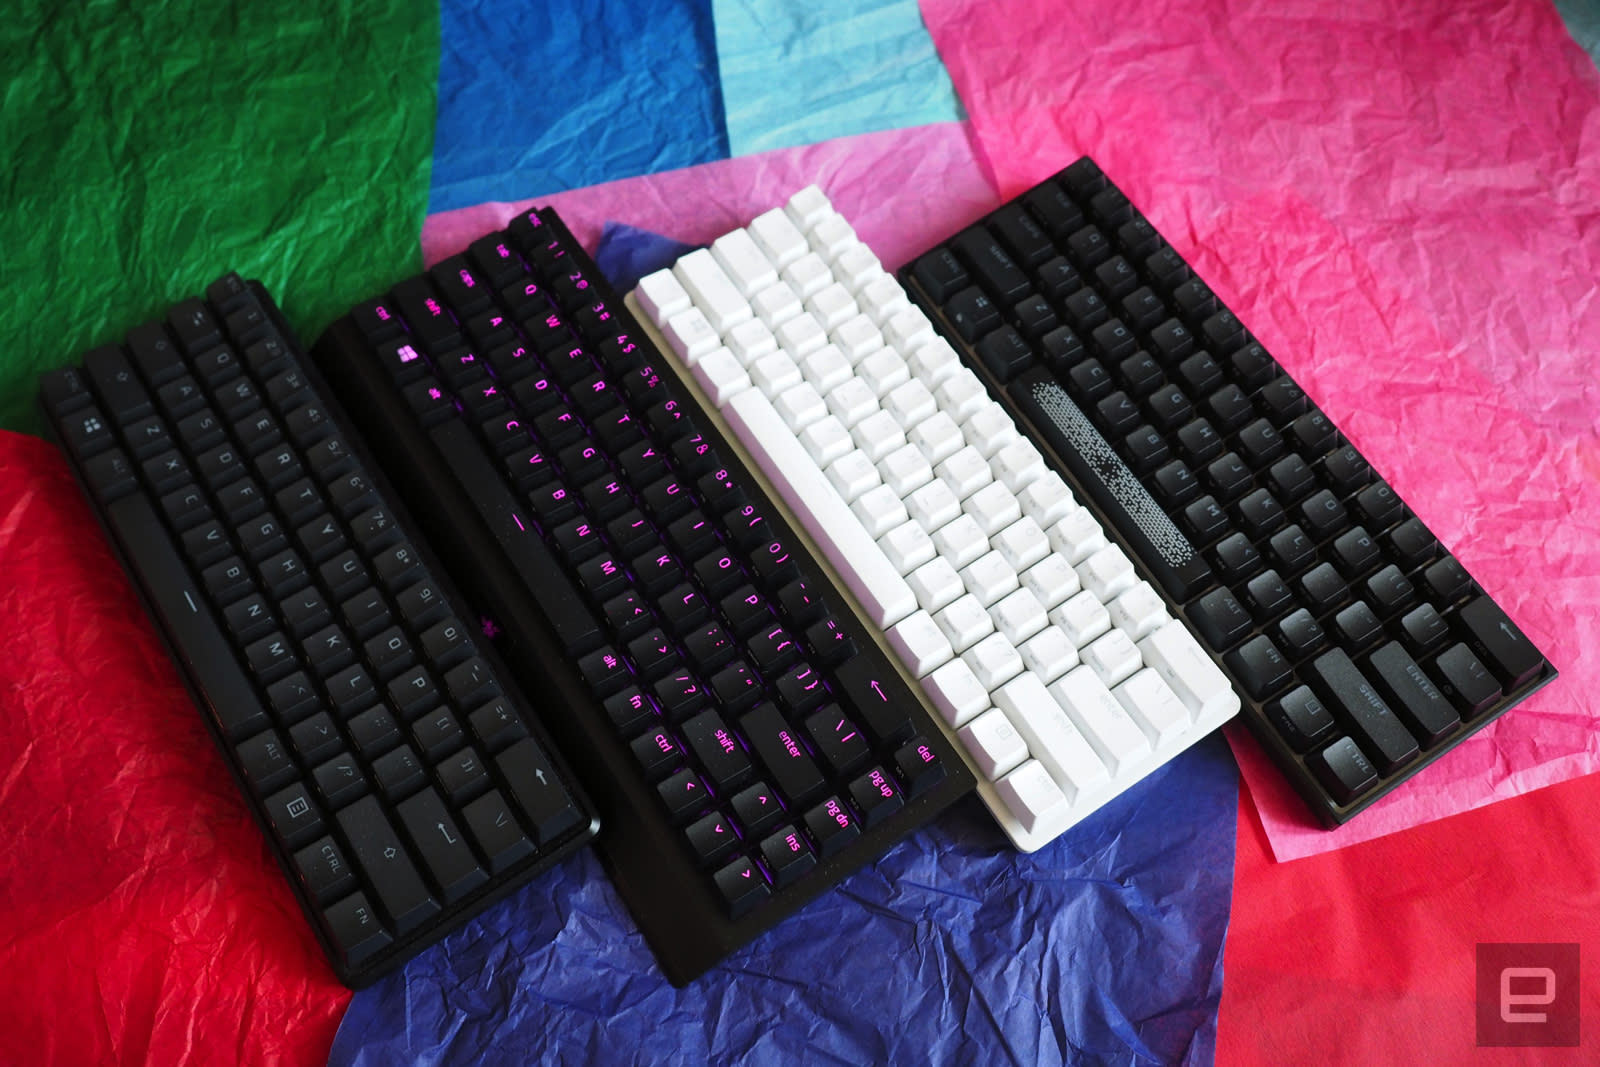 Four 60-percent keyboards in a row